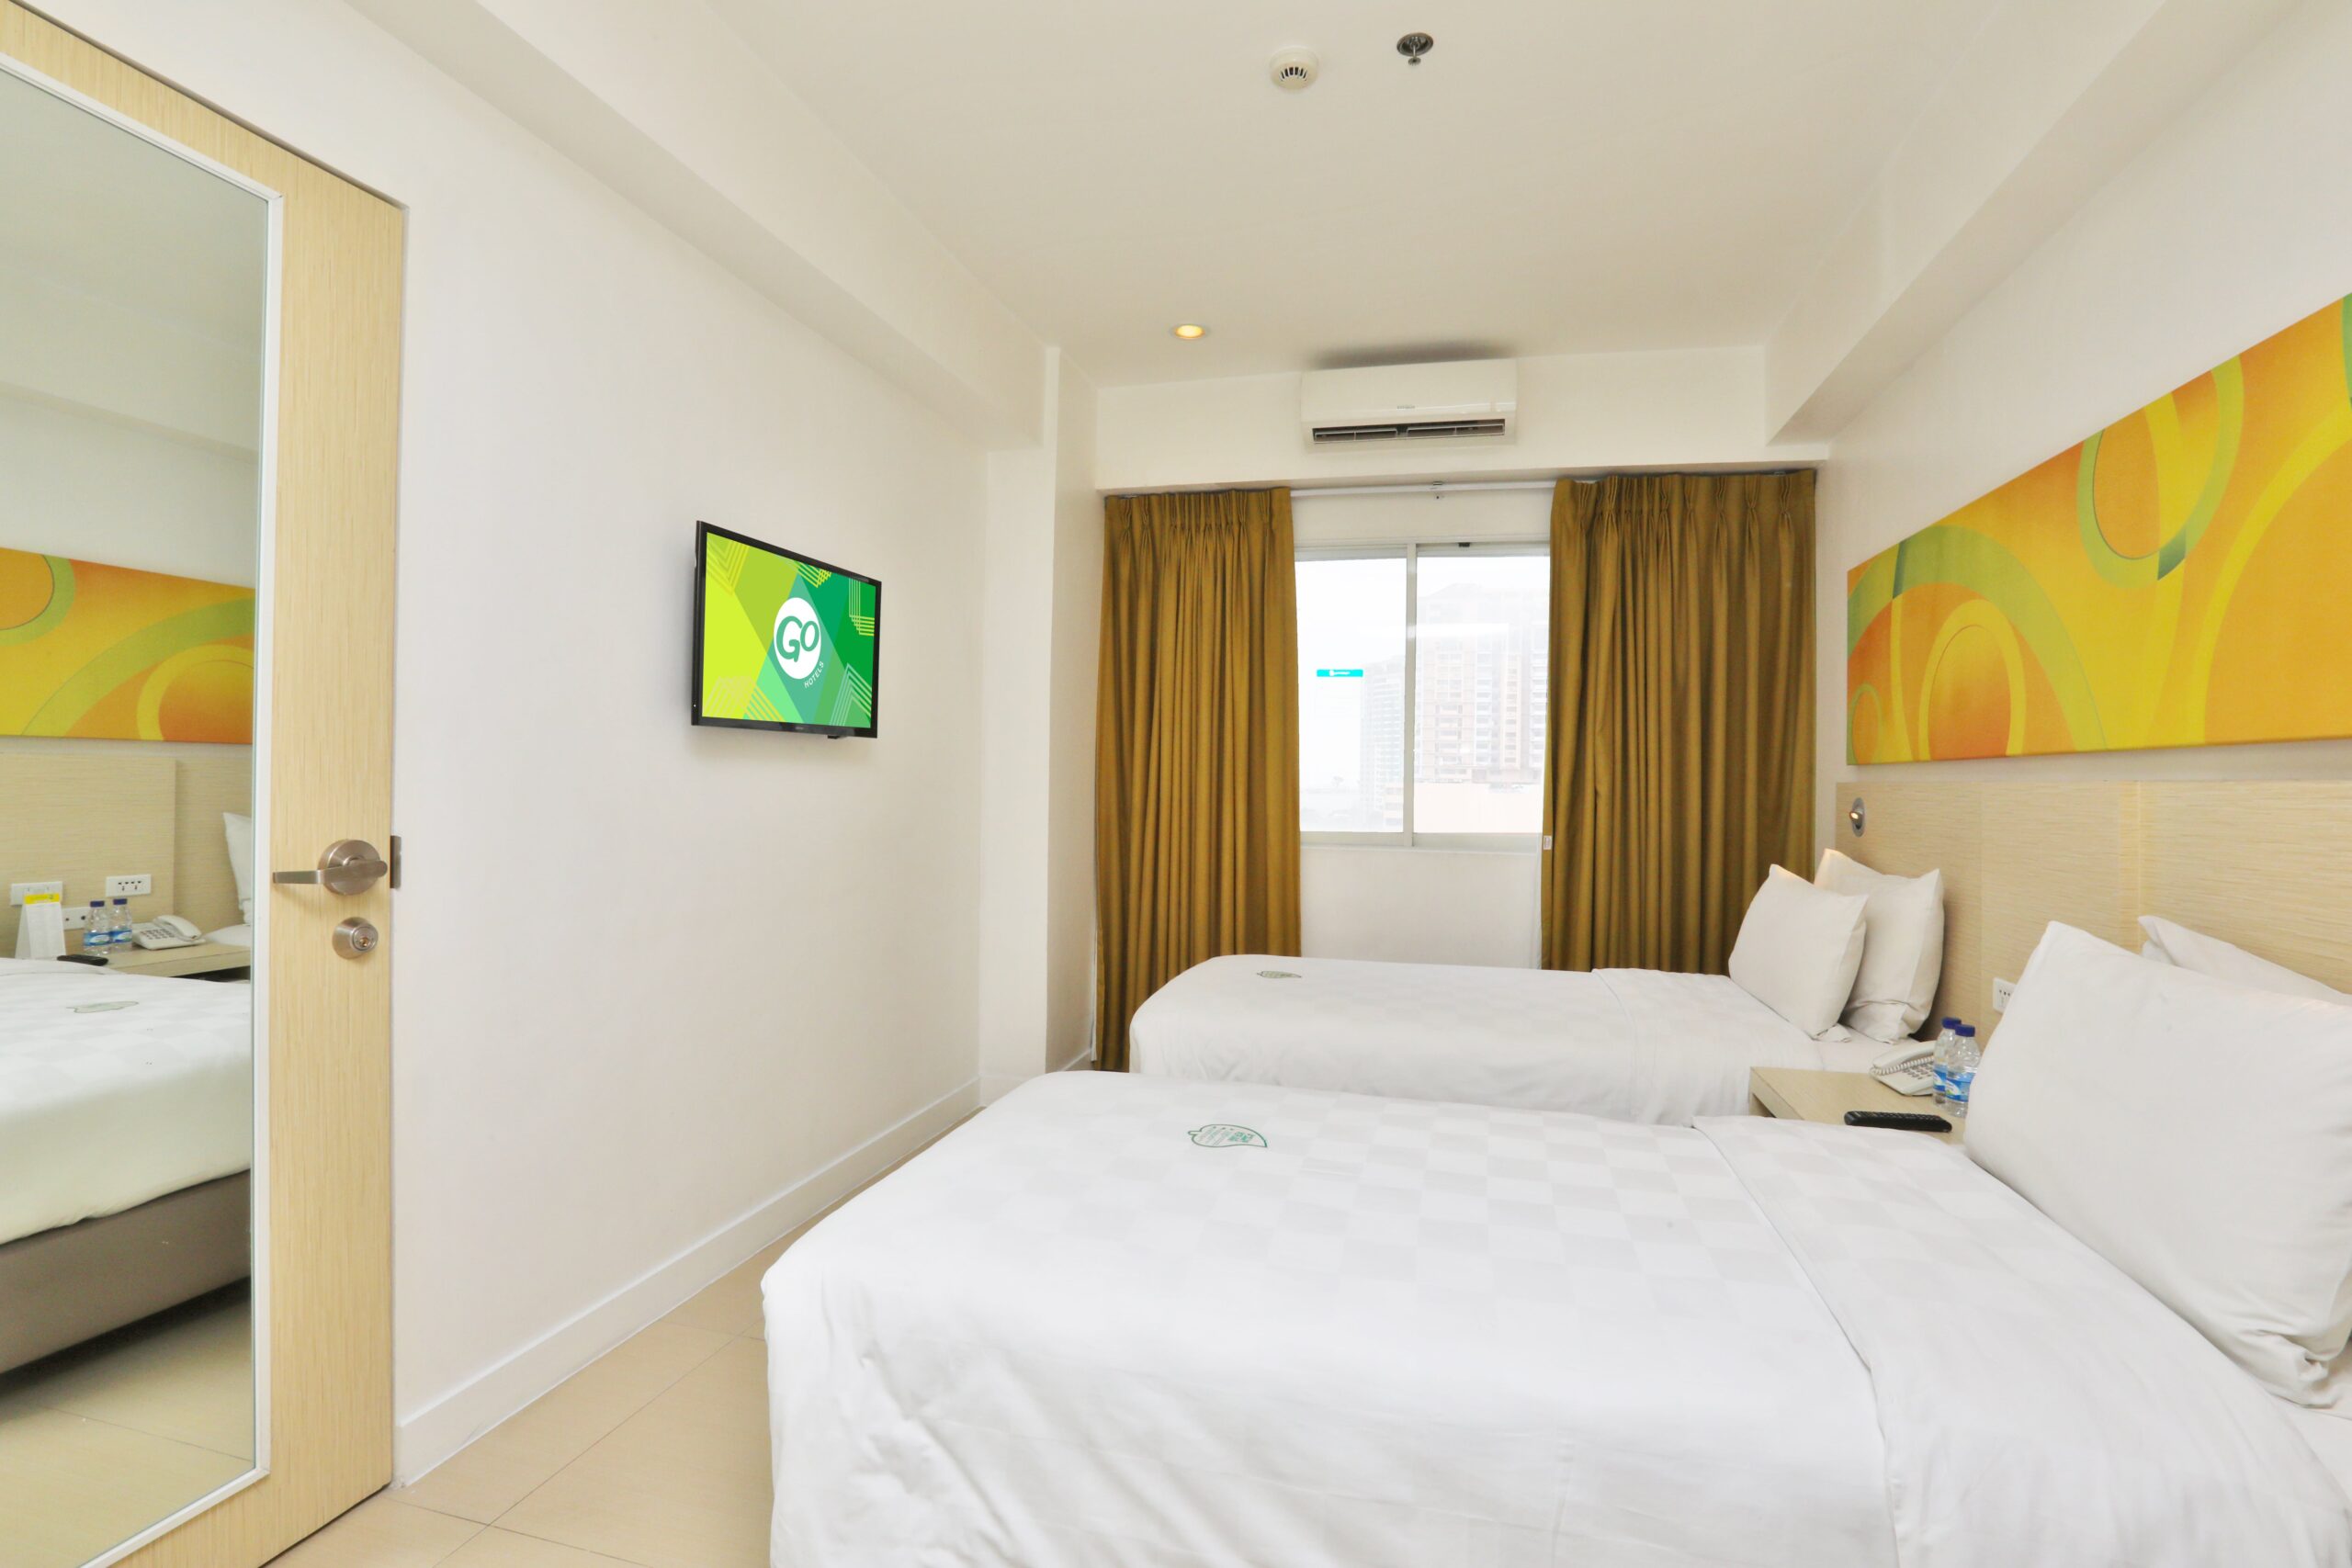 Planning your summer staycation? Experience summer bliss at Go Hotels